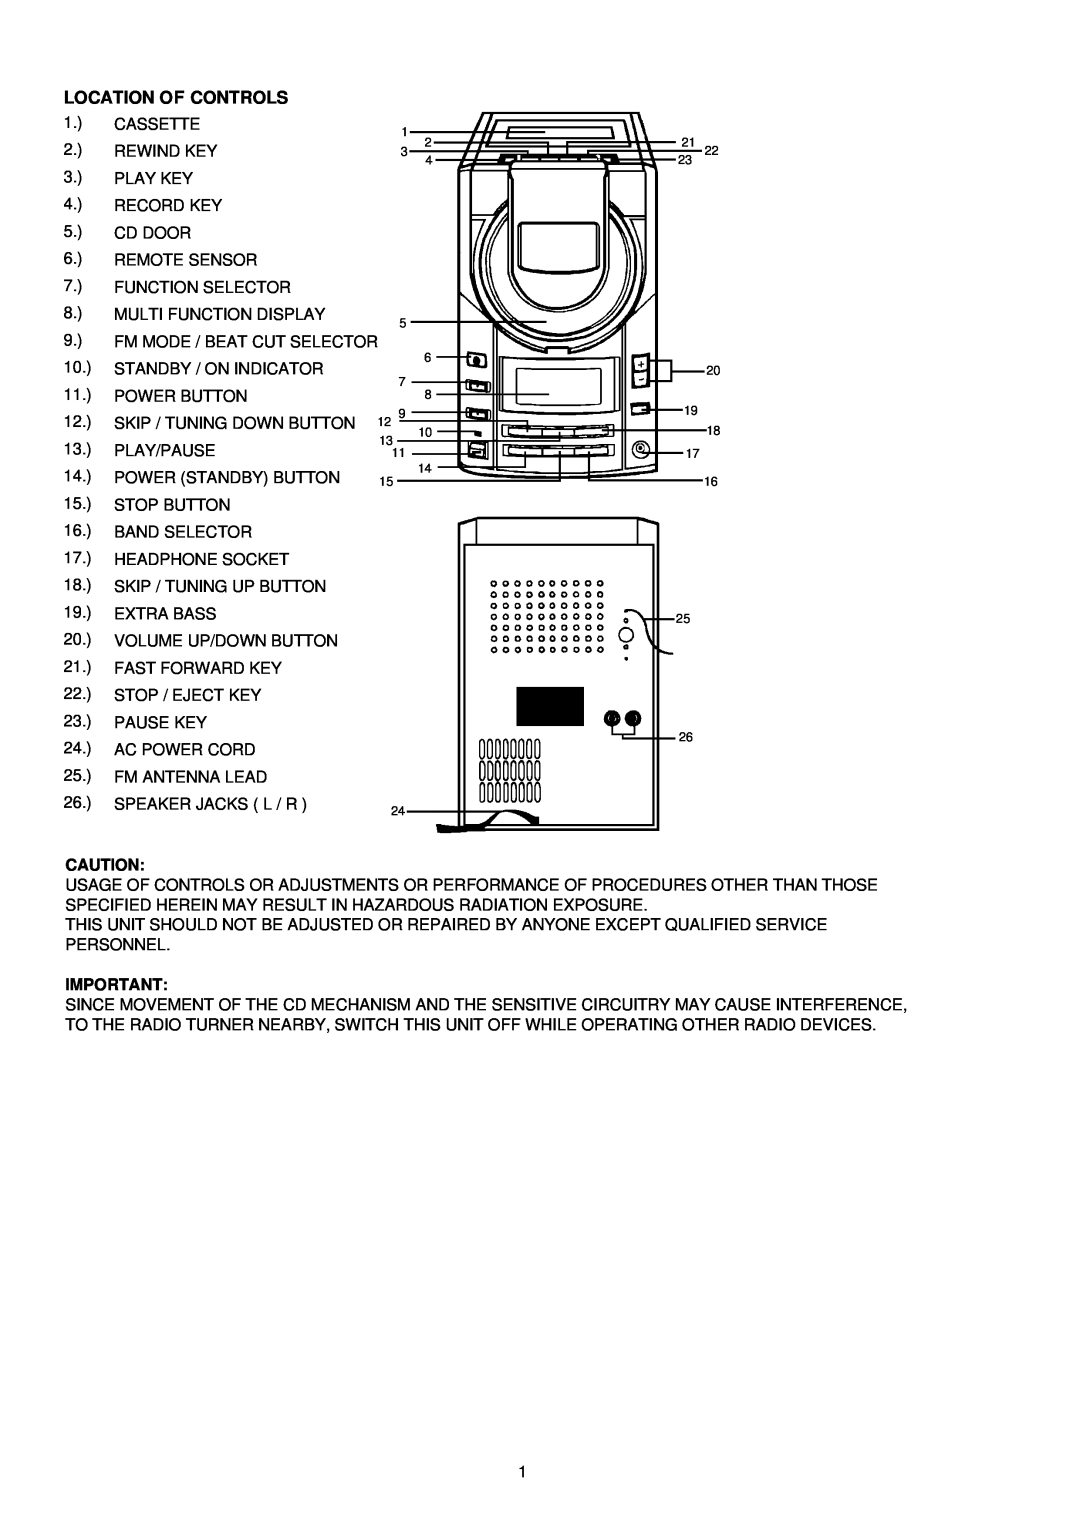 Palsonic PMC-191 instruction manual Location Of Controls 